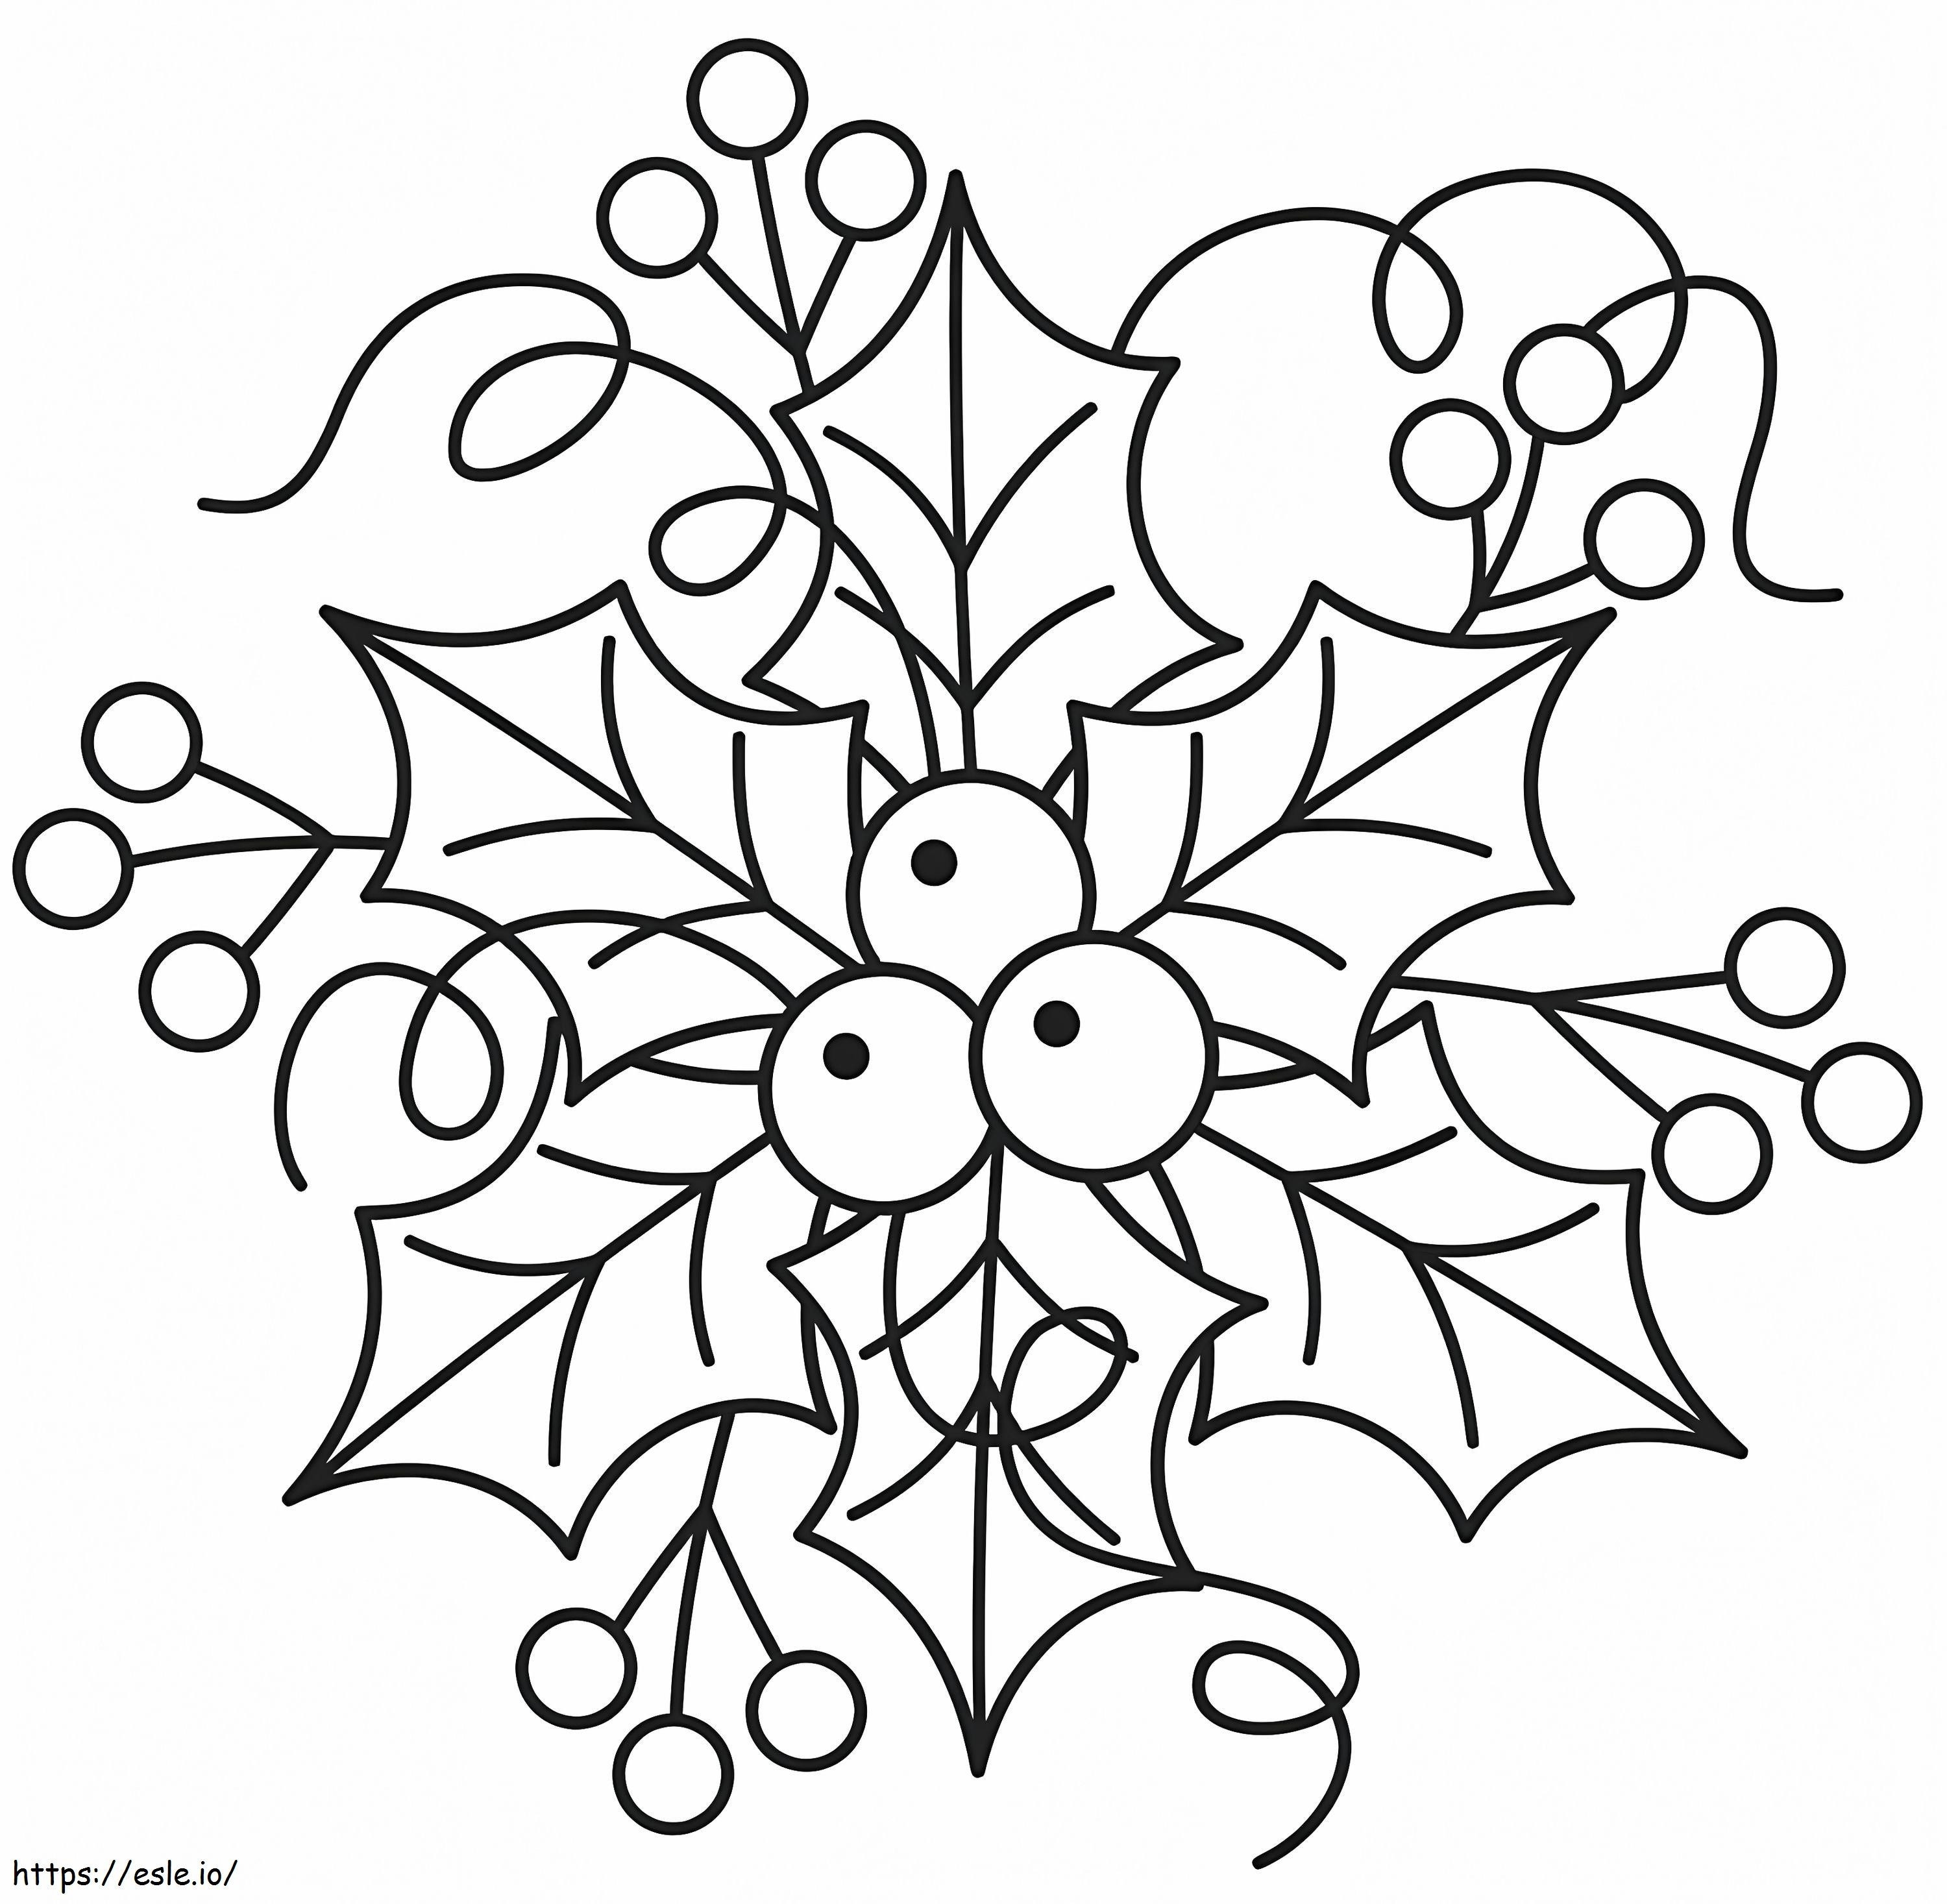 Print Christmas Holly coloring page